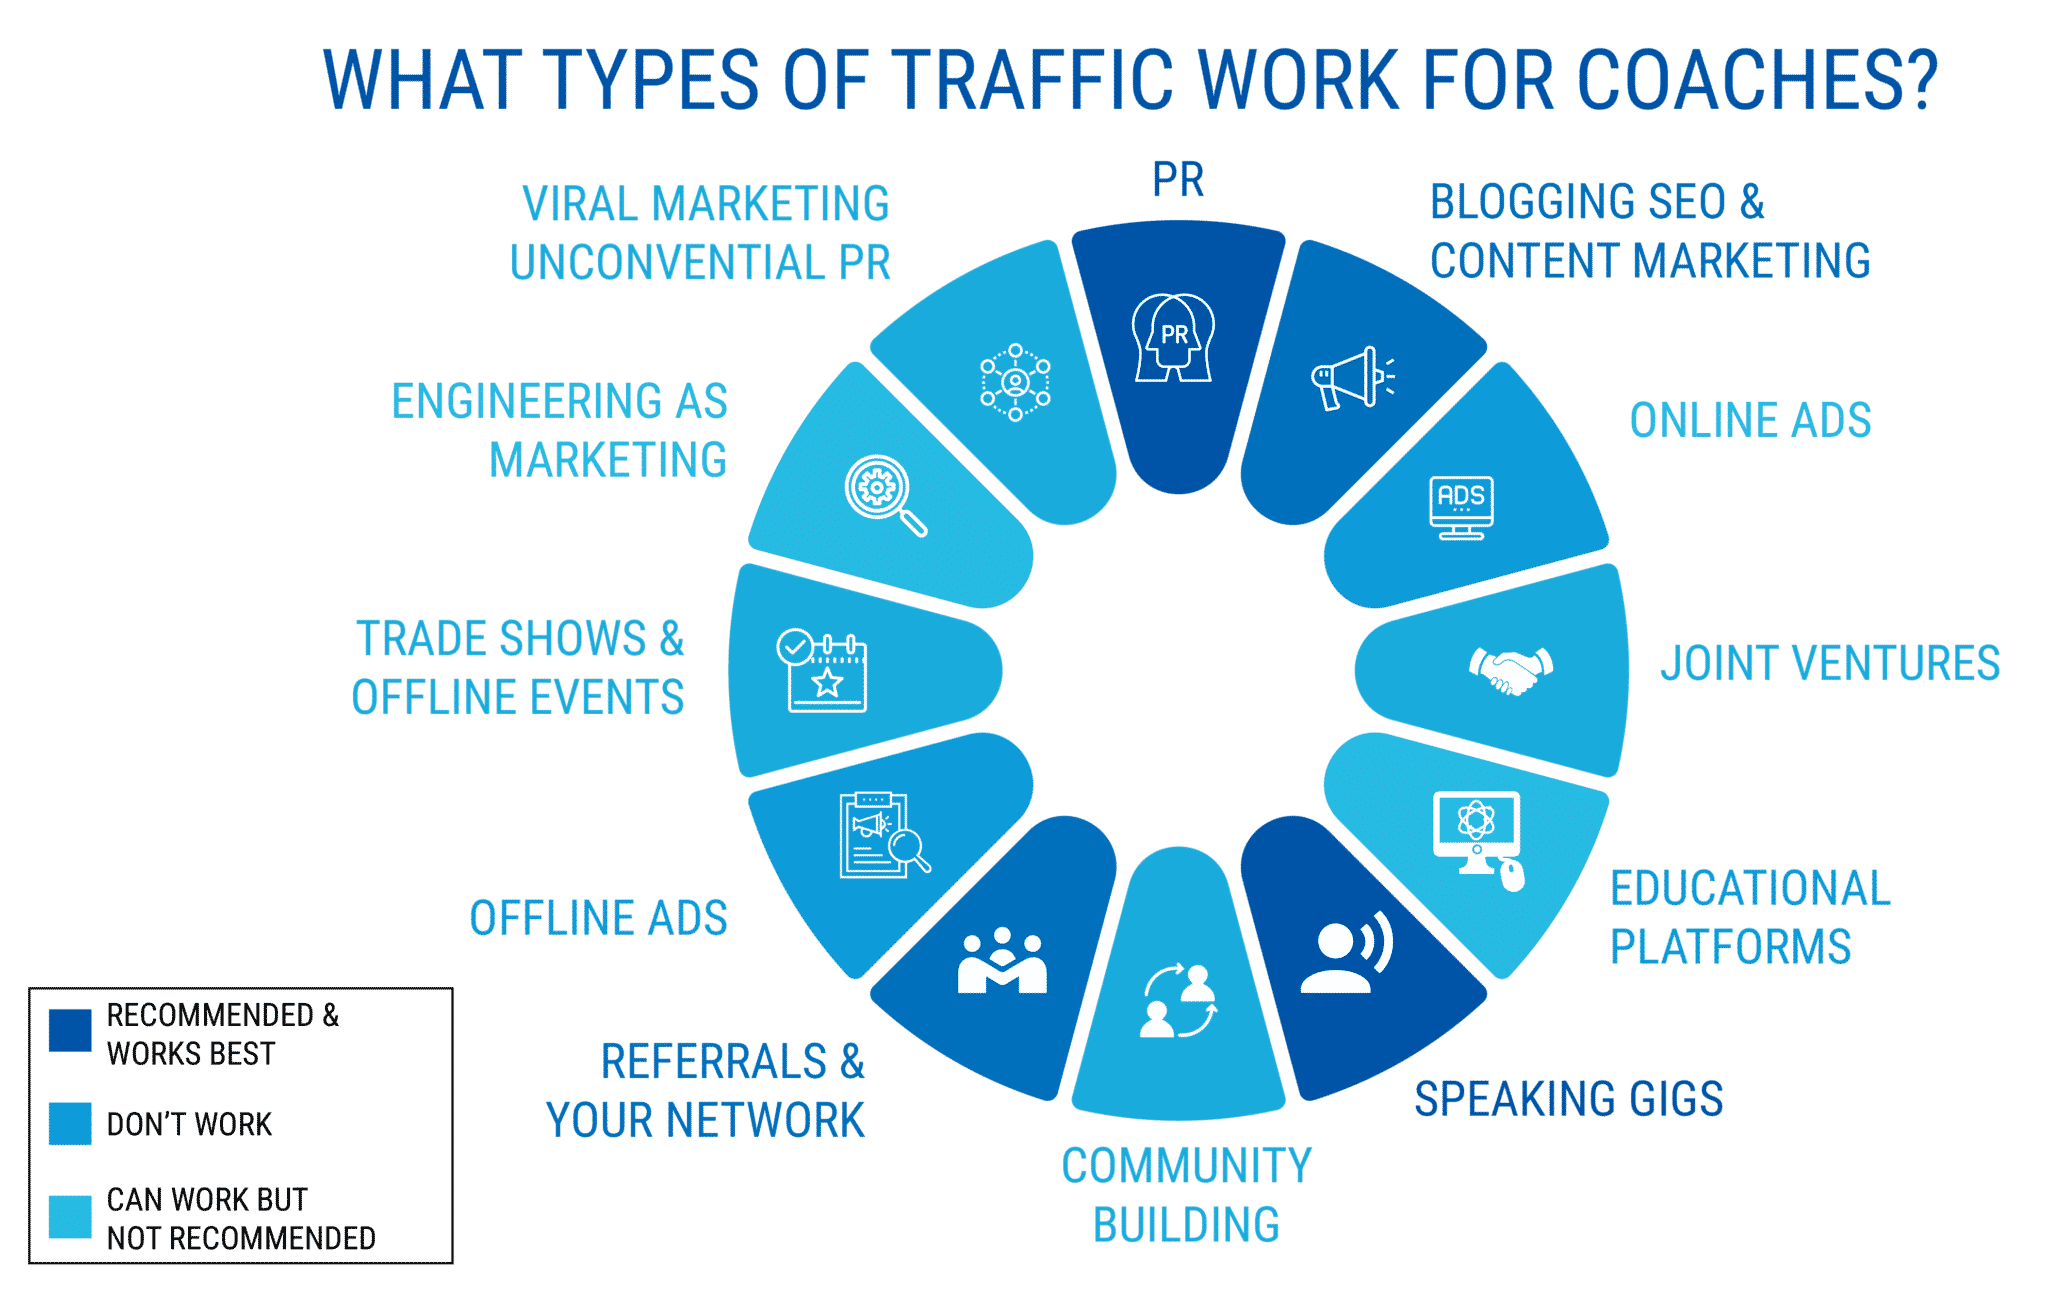 WHAT TYPES OF TRAFFIC WORK FOR COACHES